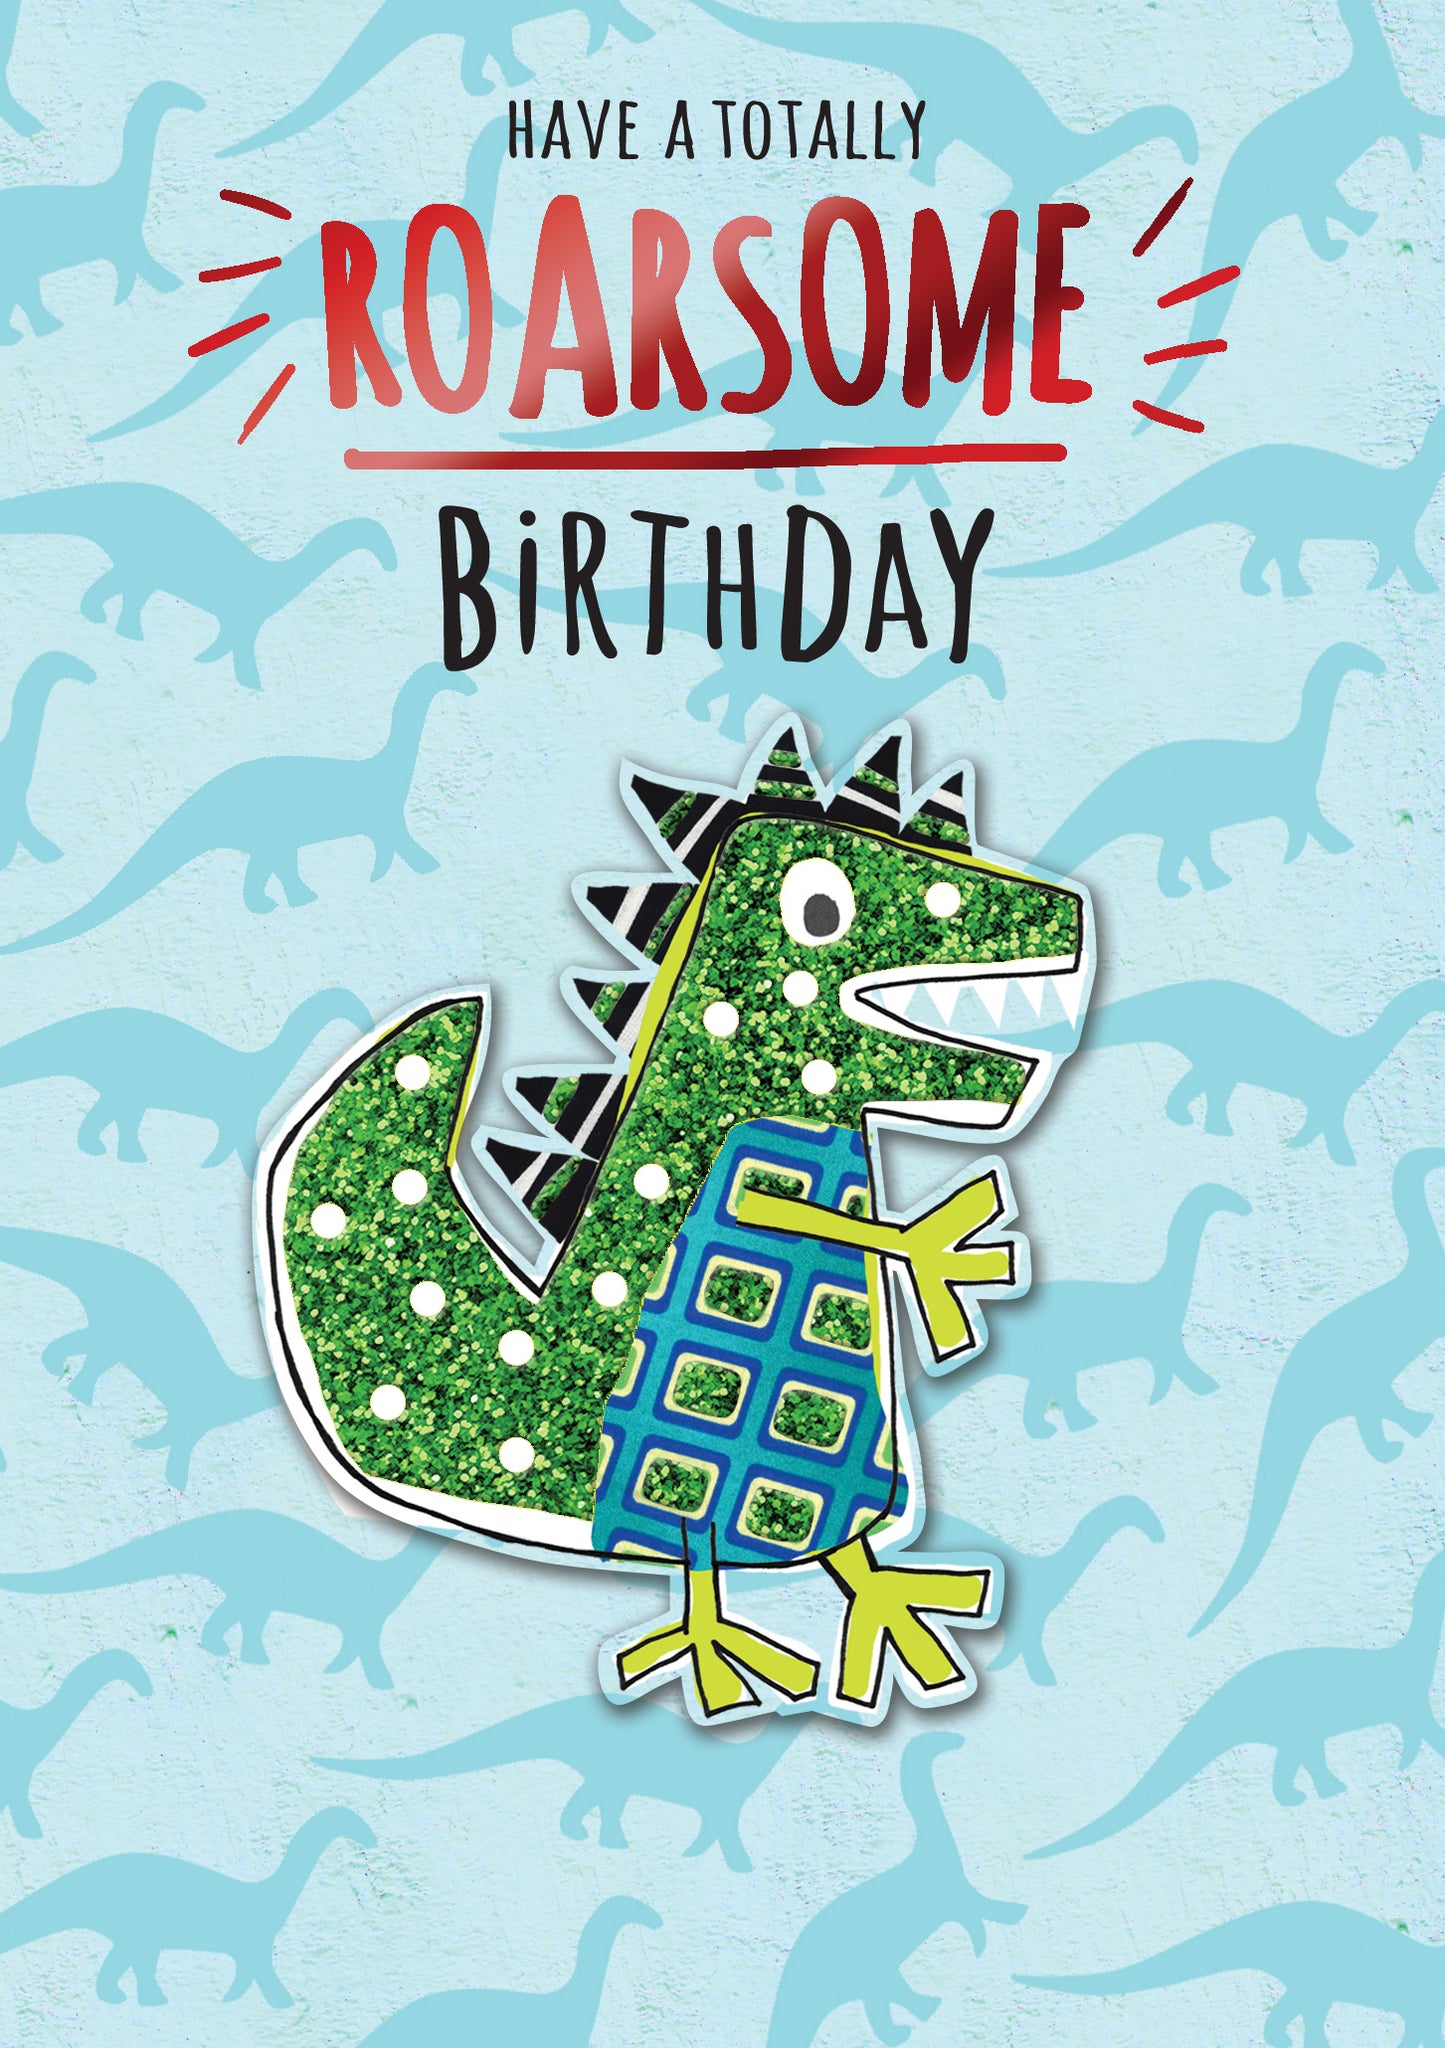 Have A Totally Roarsome Birthday Greeting Card